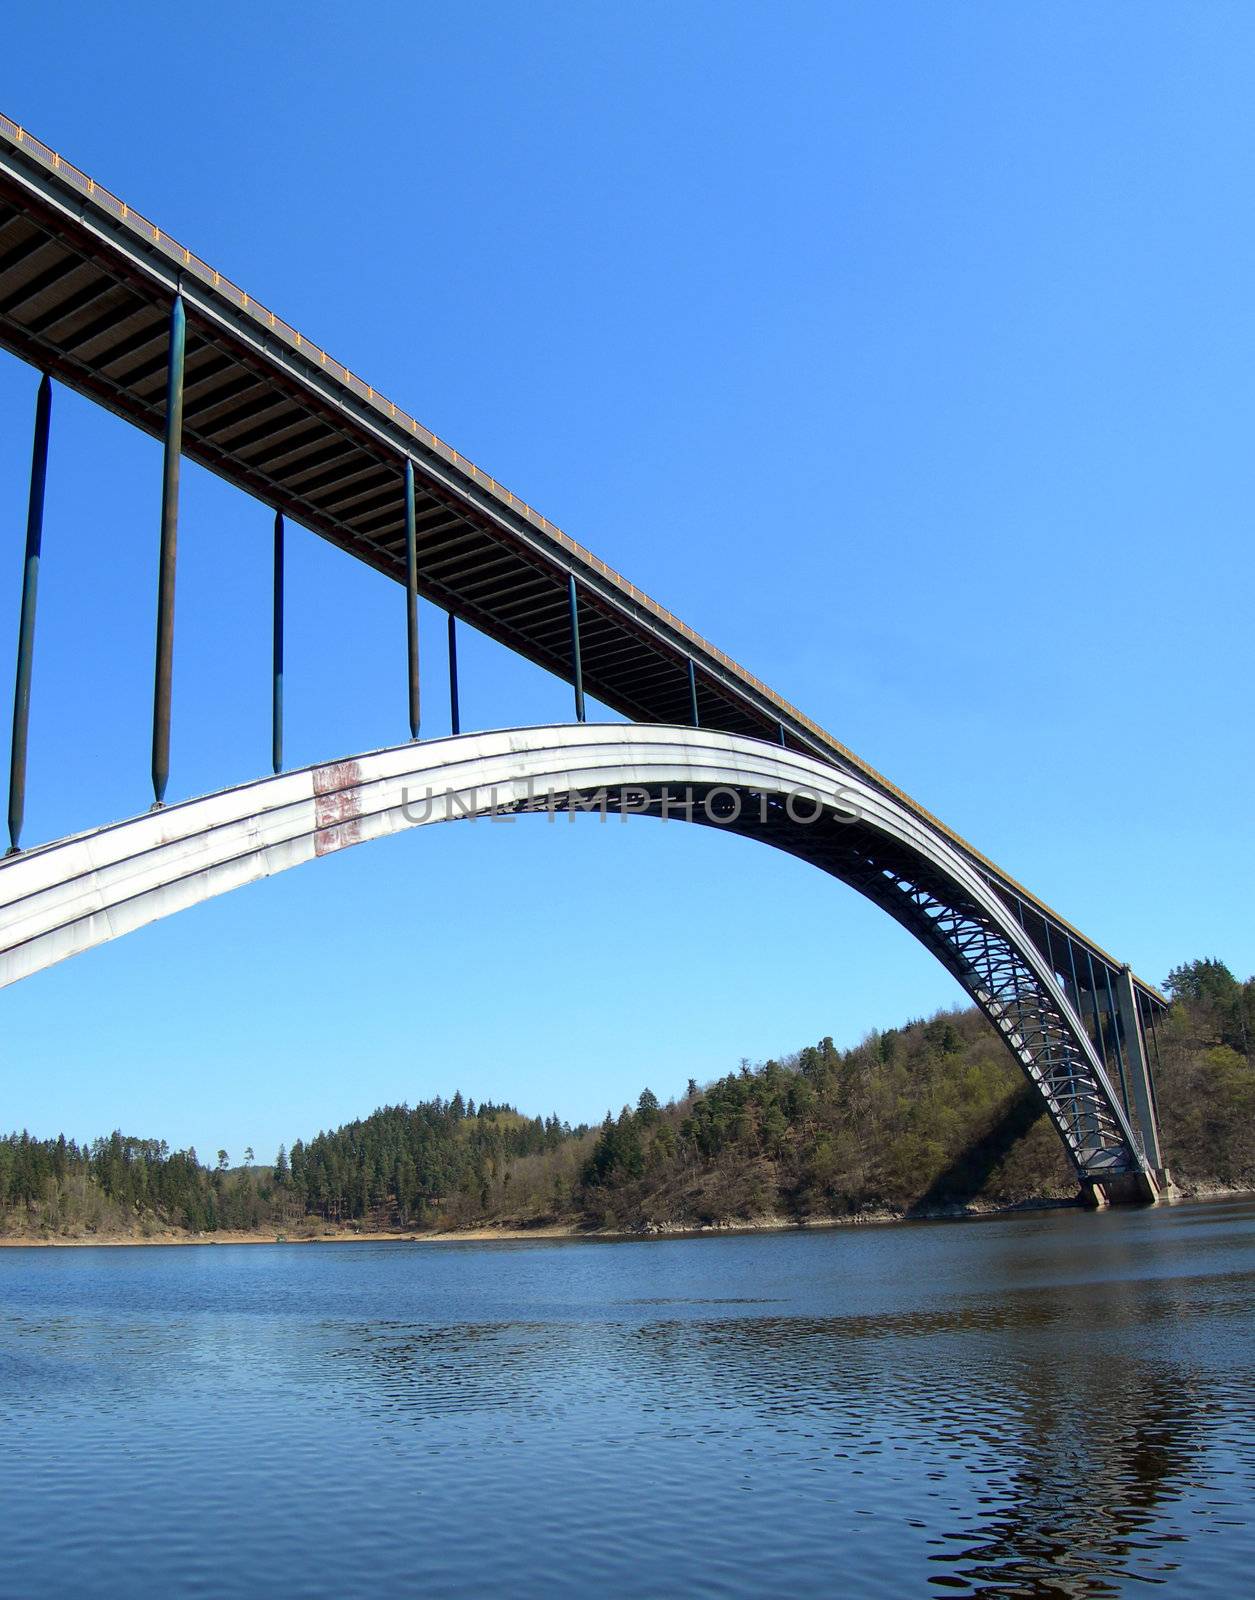 Bridge over the Vltava river. Massive steel construction with a long arch.